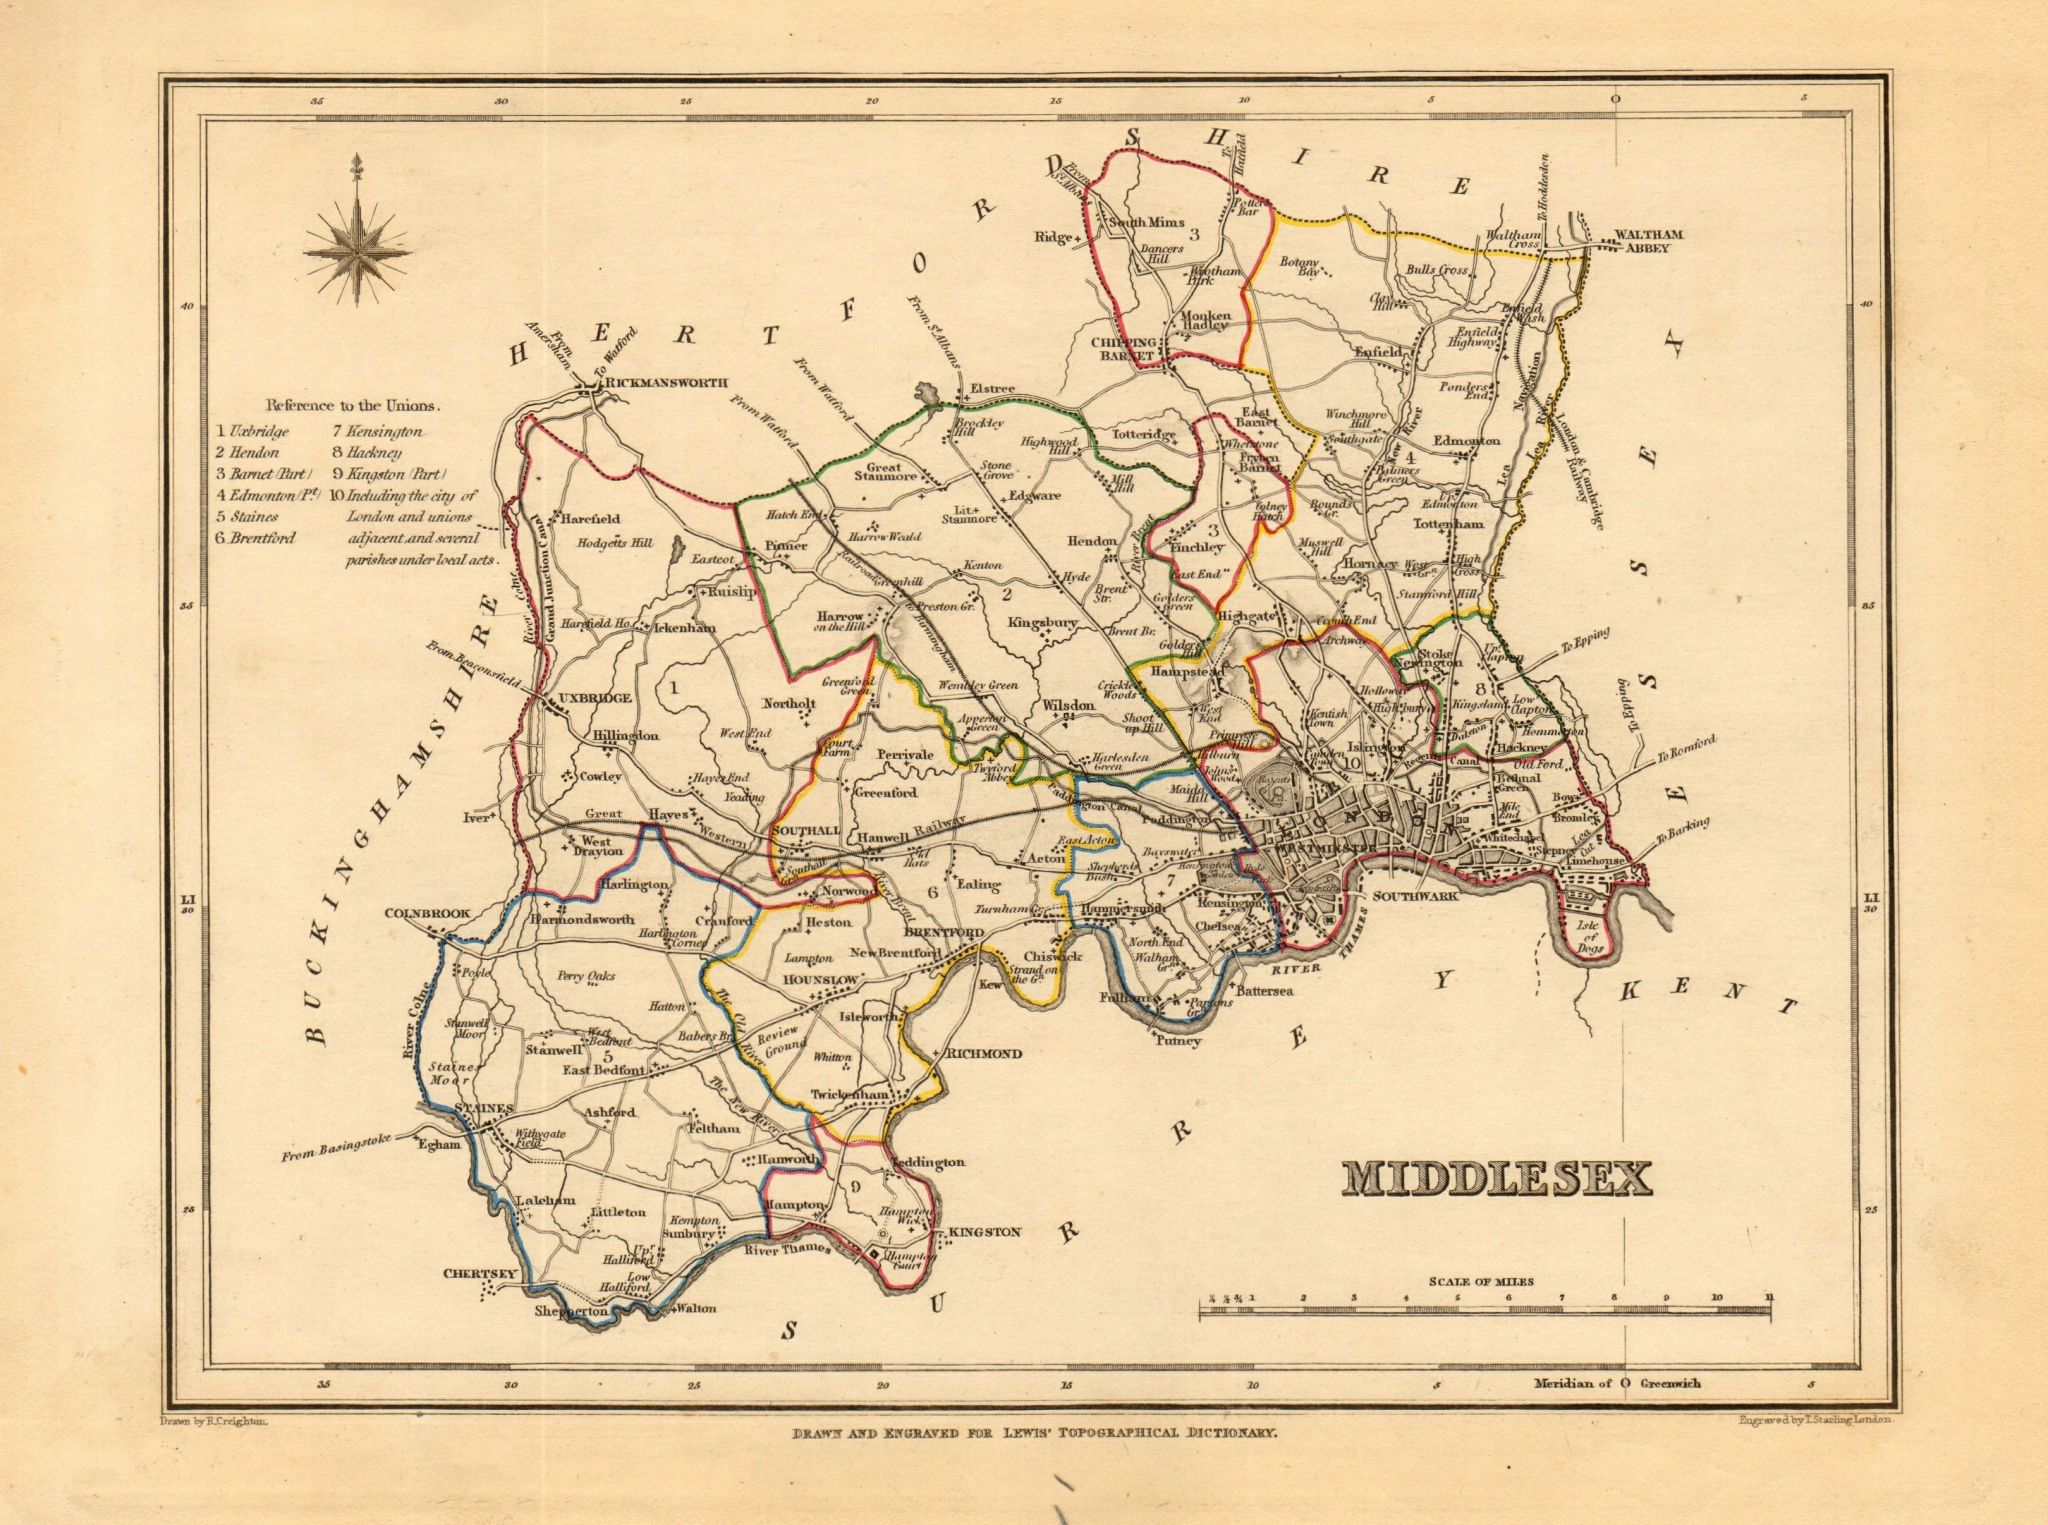 Associate Product Antique county map of MIDDLESEX by Creighton & Starling for Lewis c1840